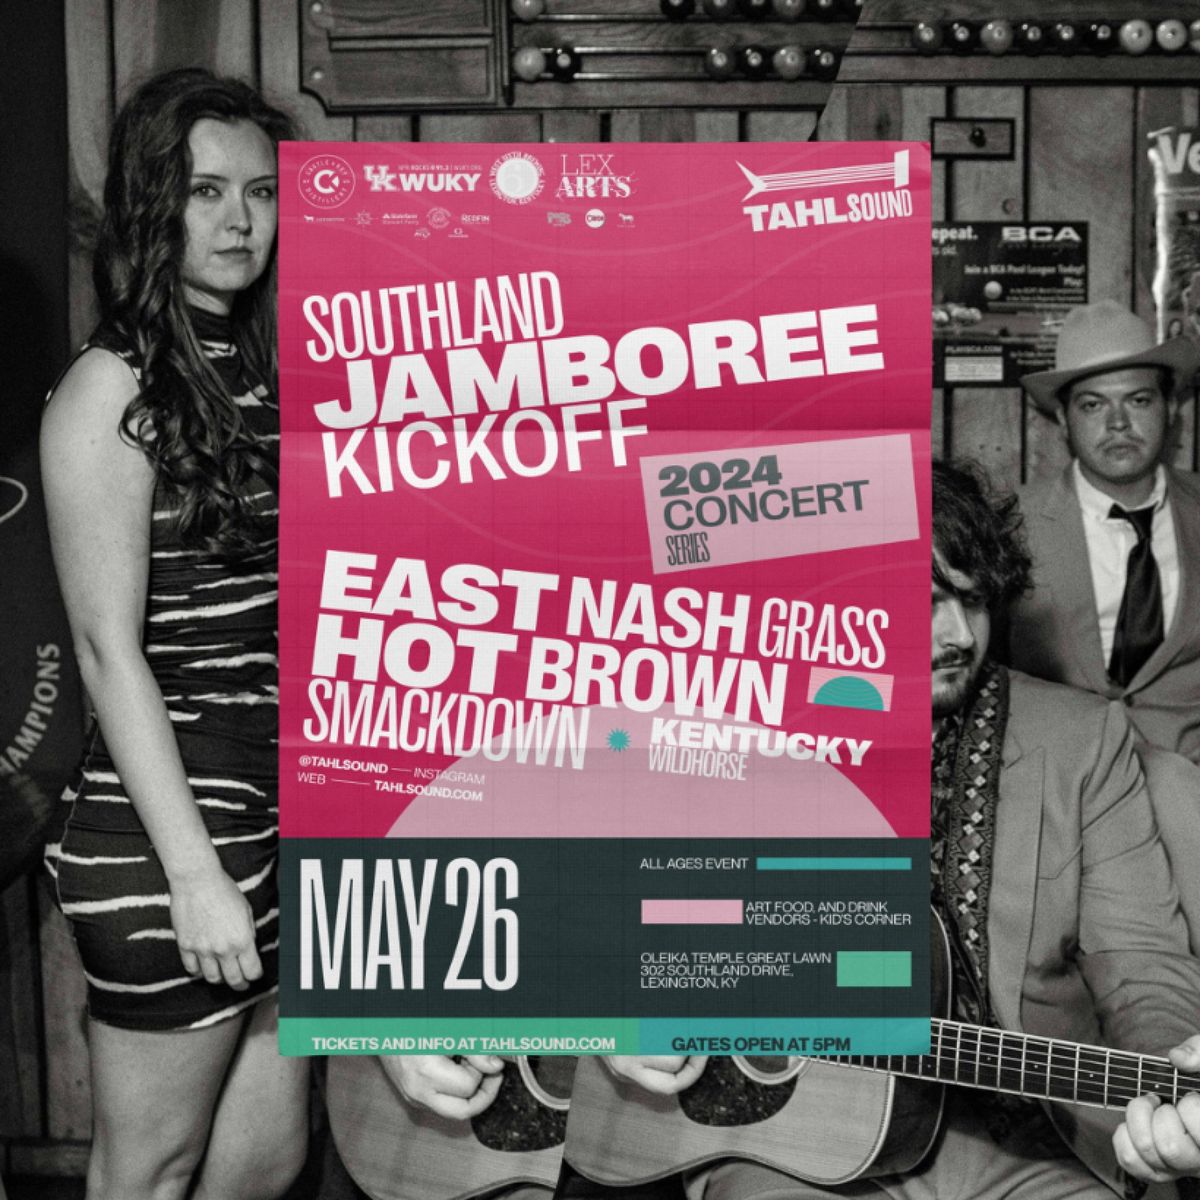 Tahlsound Presents: Southland Jamboree Kickoff | East Nash Grass, Hot Brown Smackdown, KY Wildhorse